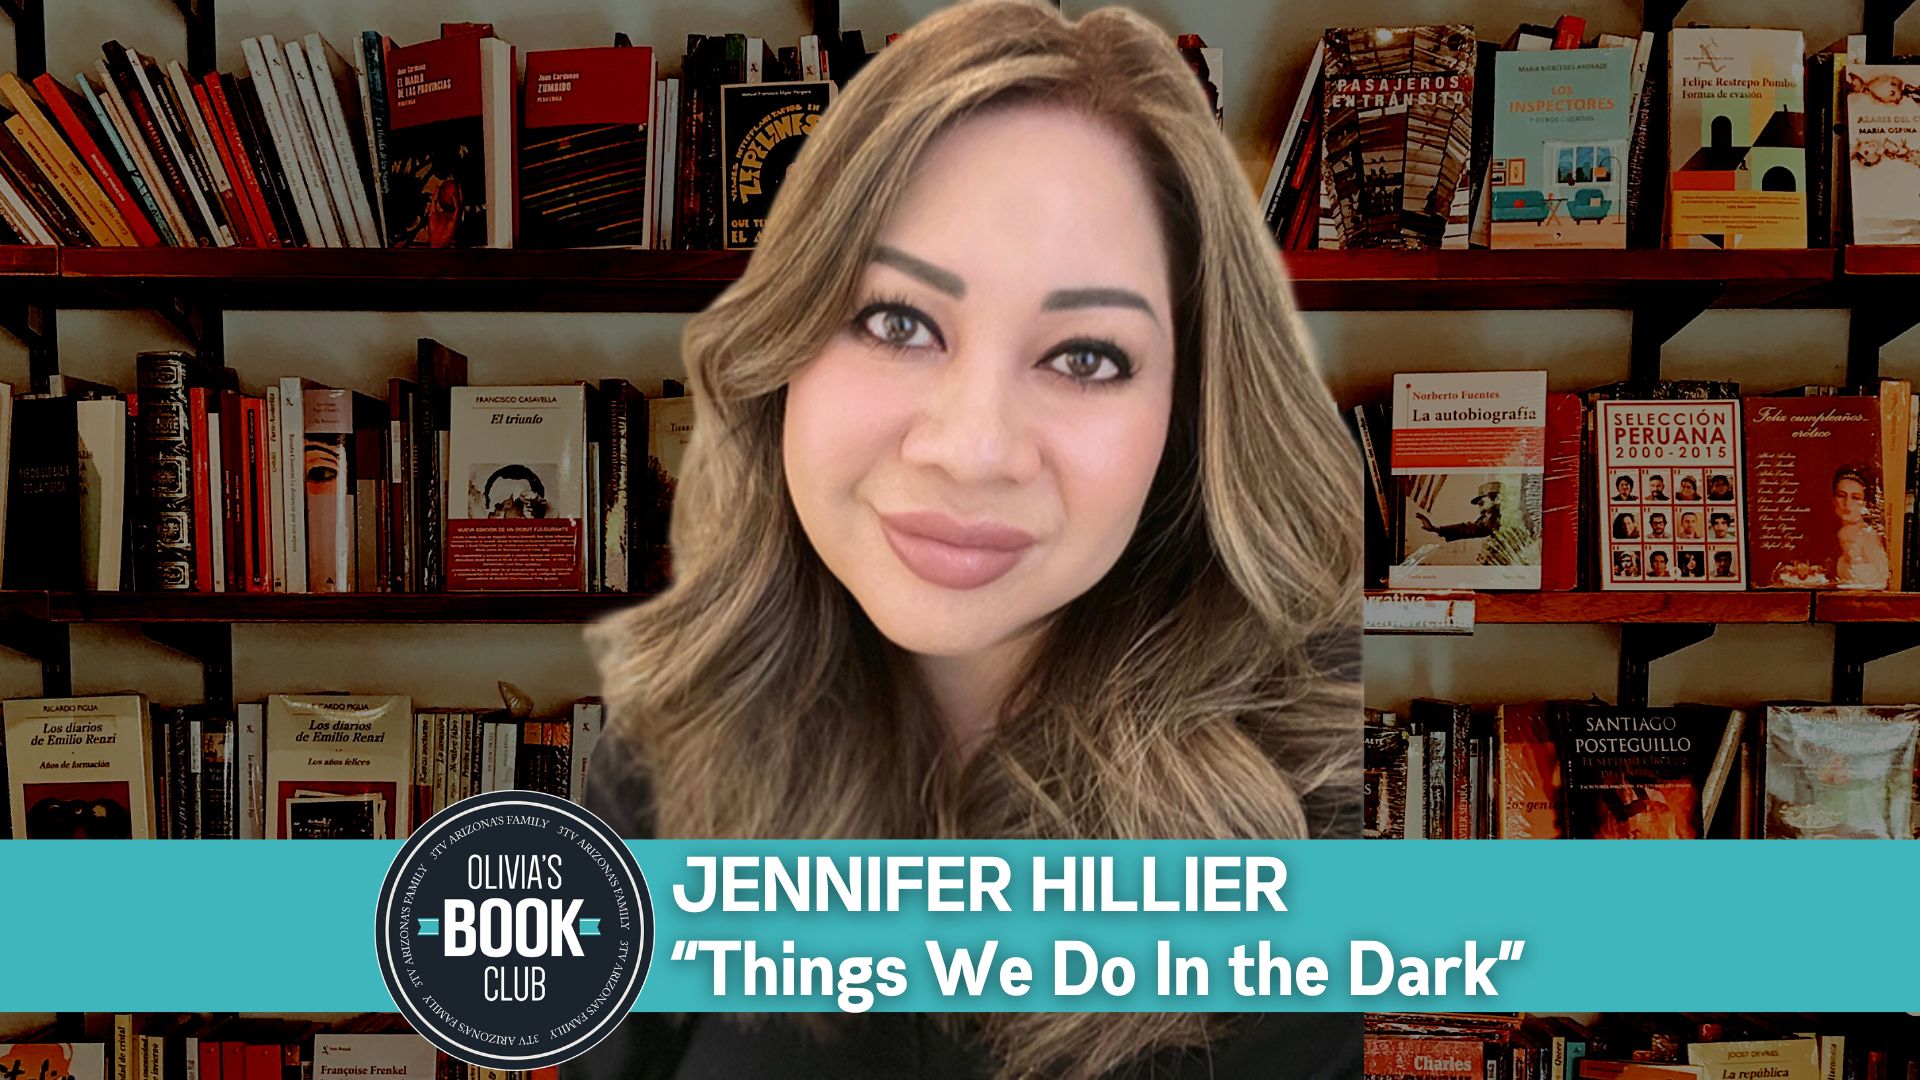 Olivias Book Club Podcast Jennifer Hillier, Things We Do In the Dark picture